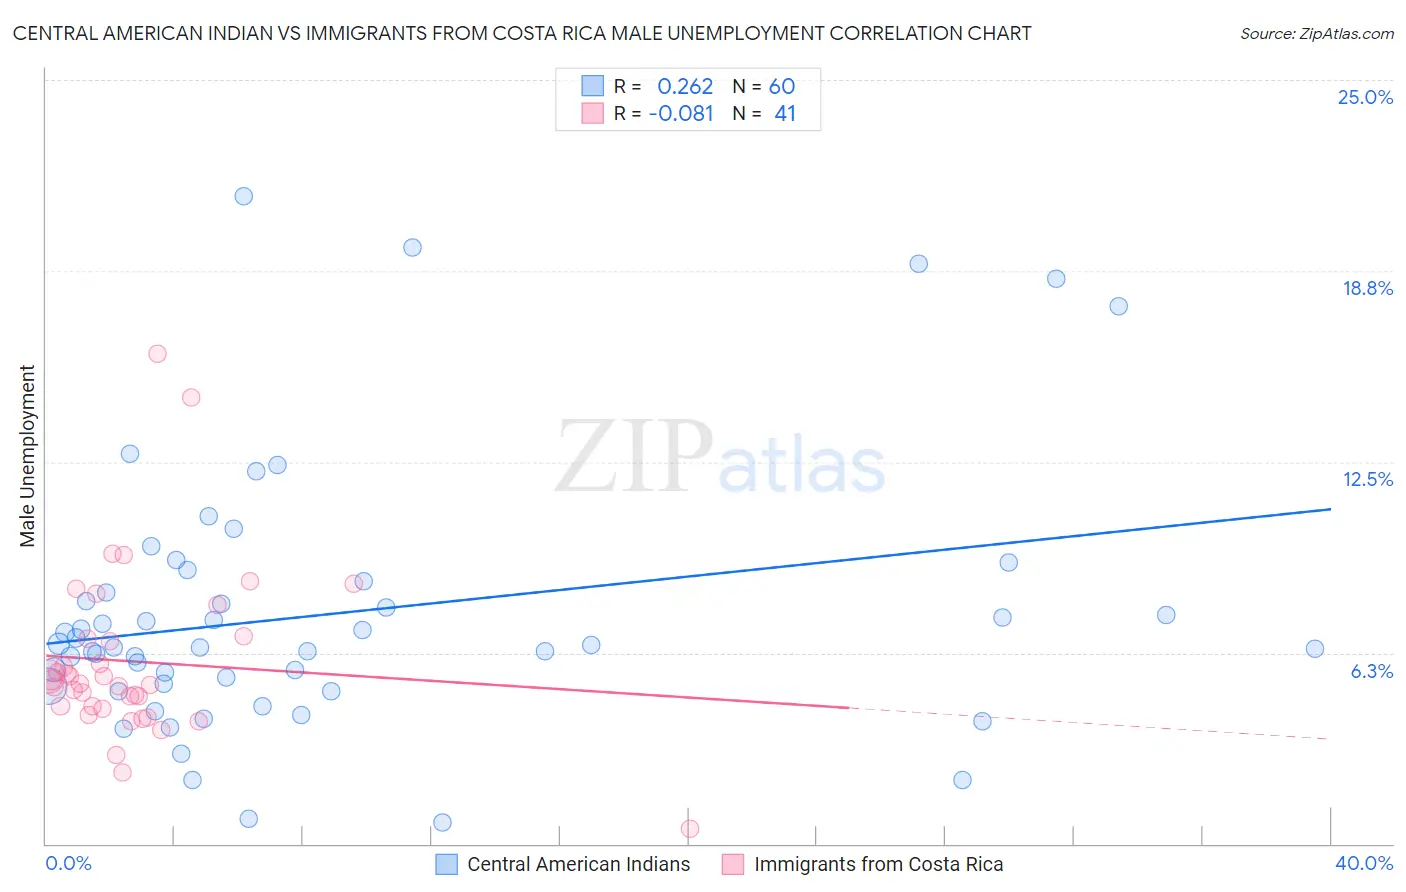 Central American Indian vs Immigrants from Costa Rica Male Unemployment